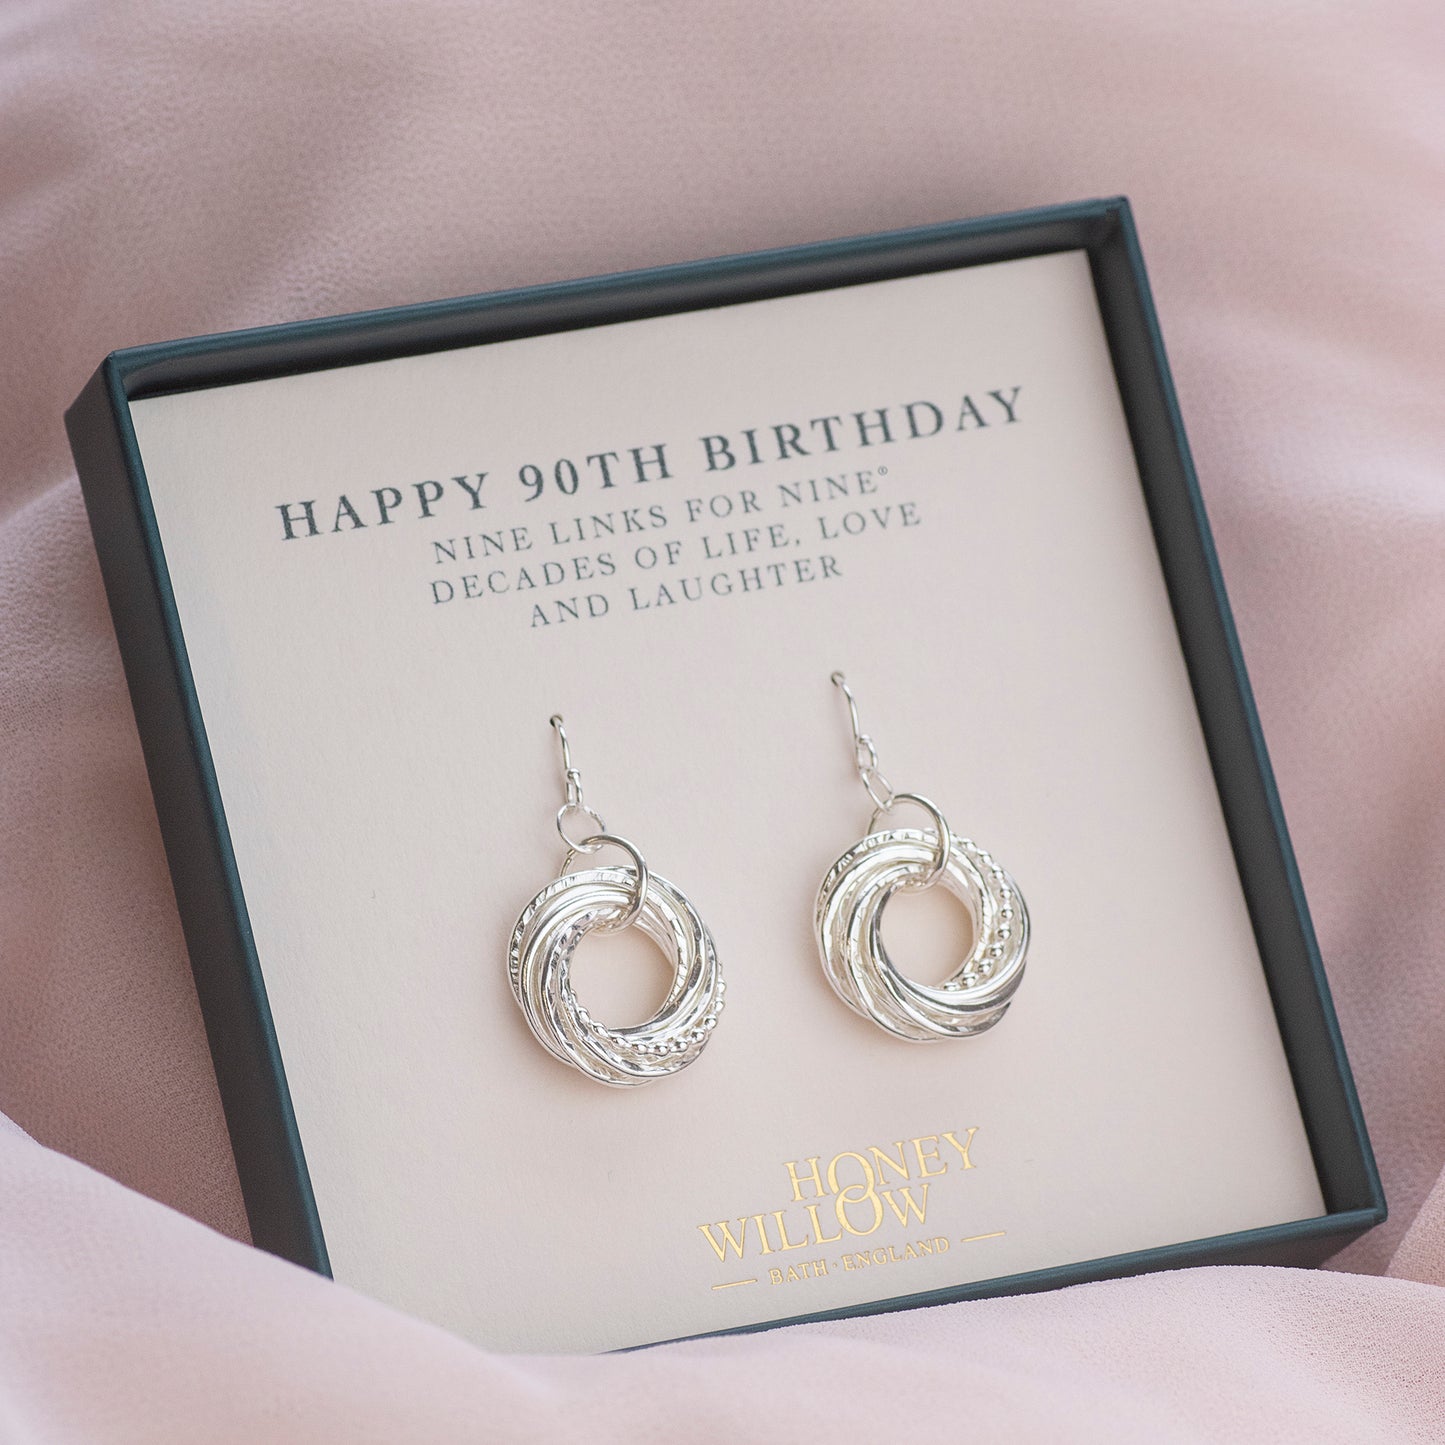 90th Birthday Earrings - 9 Links for 9 Decades - Silver